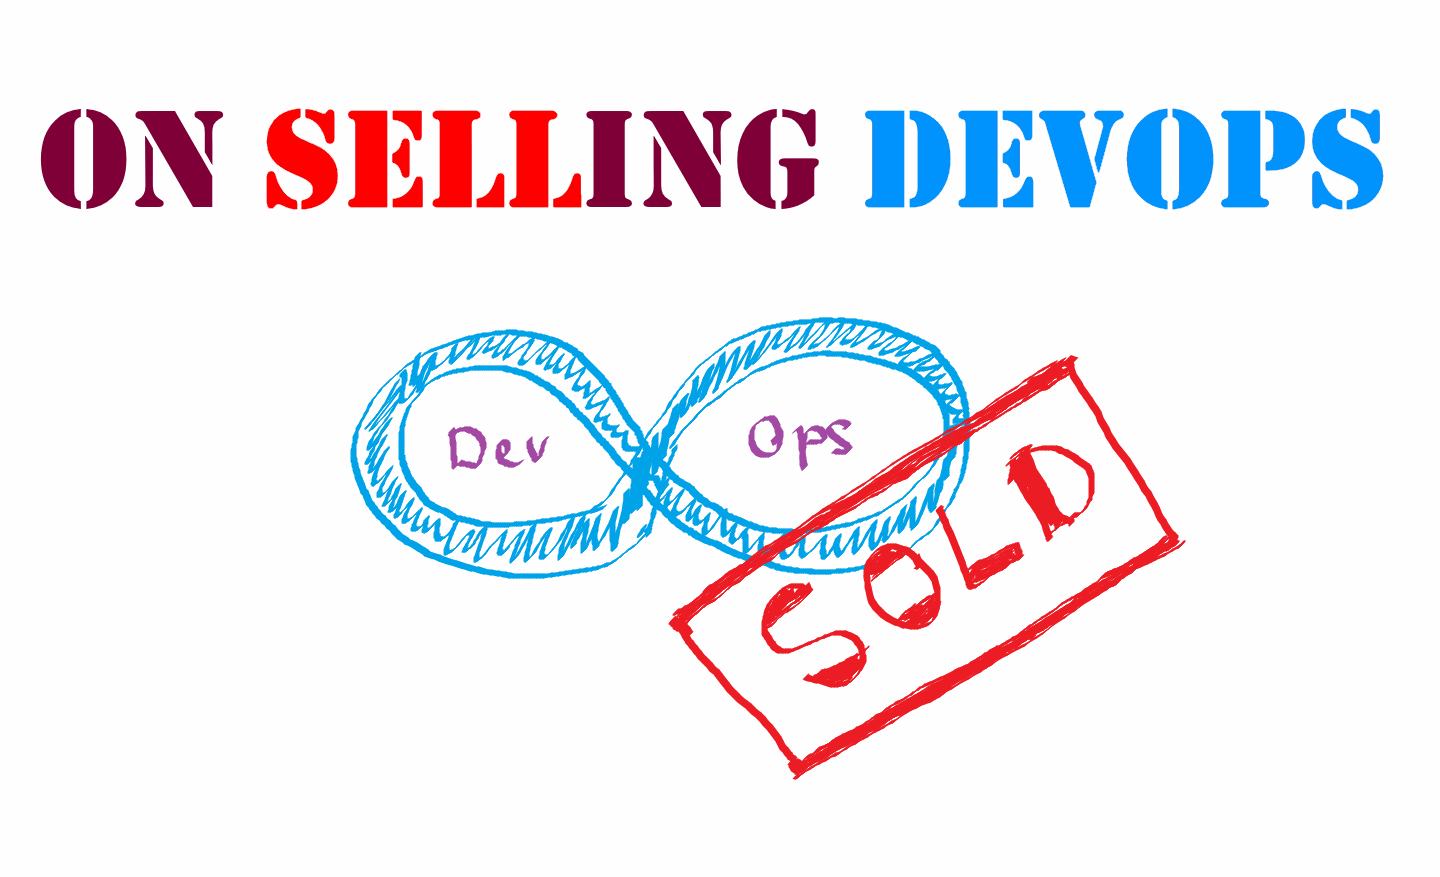 On selling (and buying) DevOps